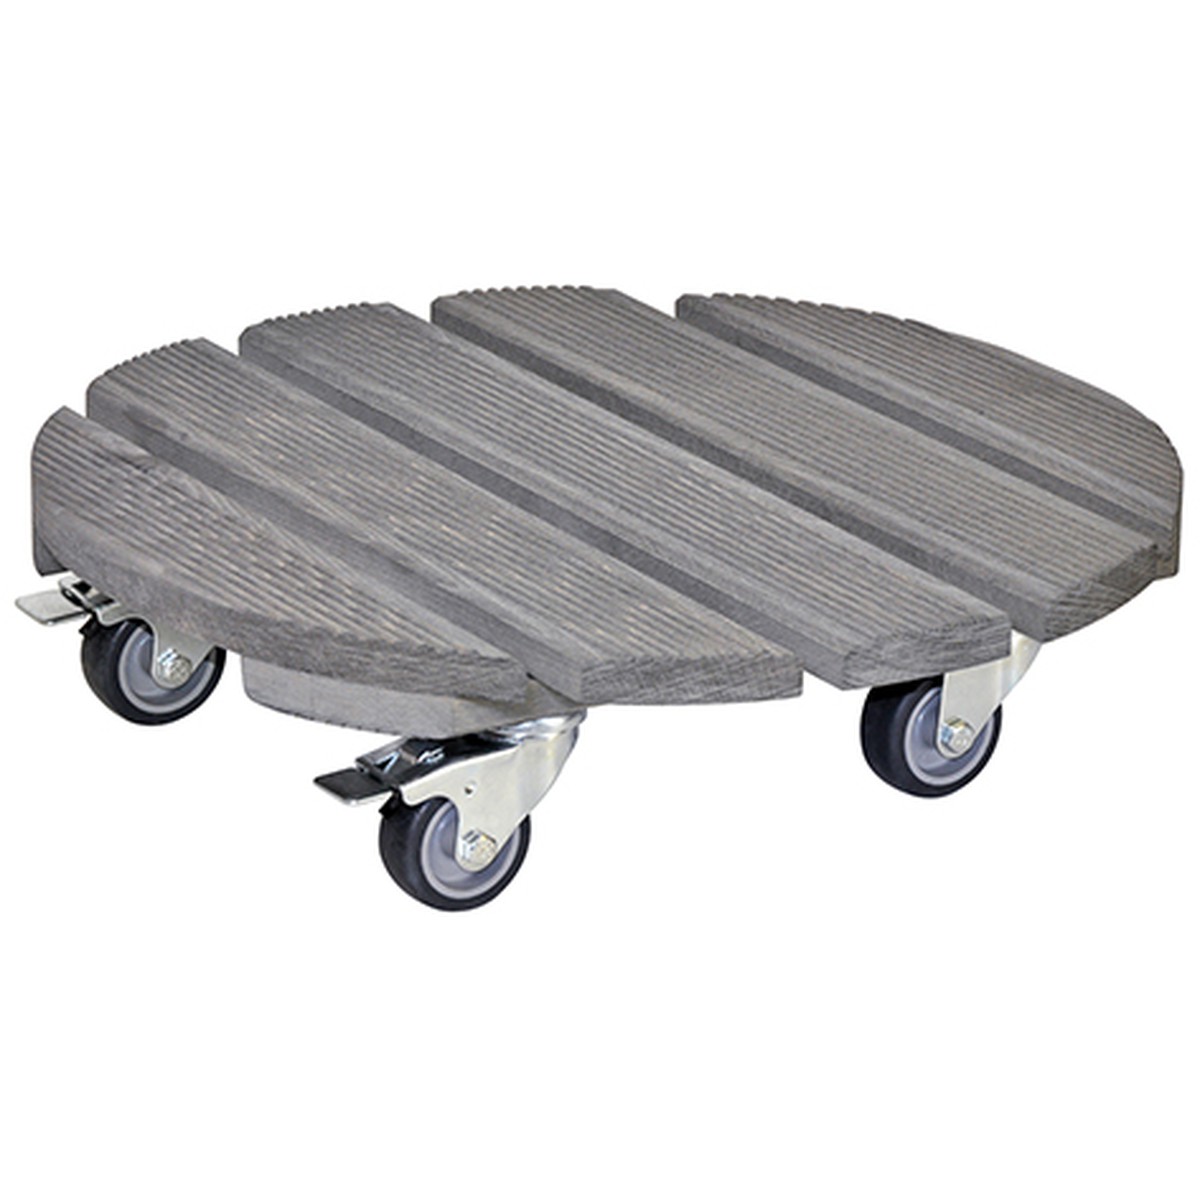   Chariot Multi Creo GH 0863  380mm Sup 200kg